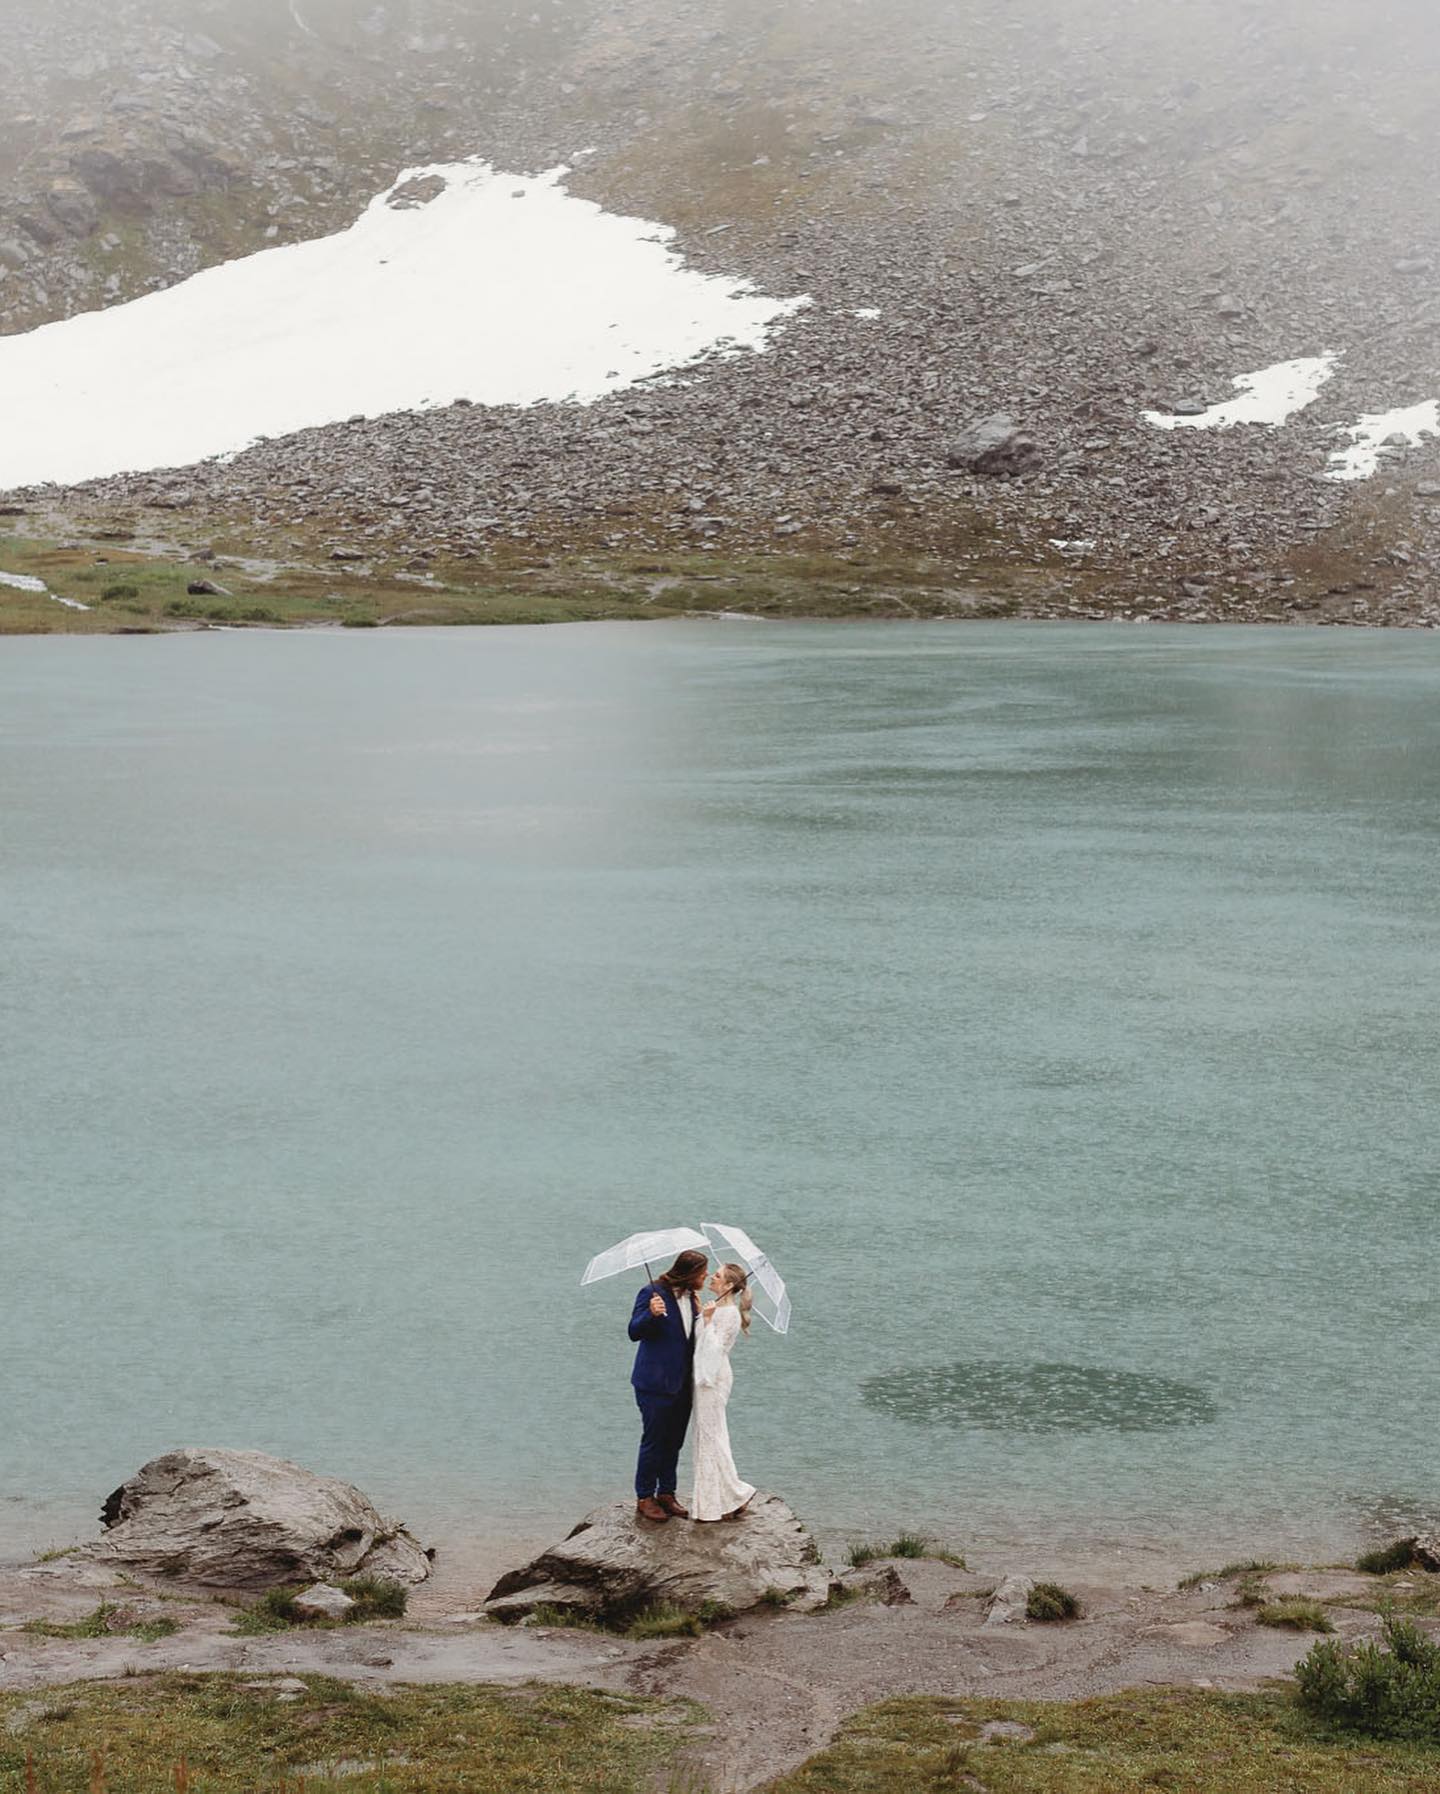 a couple standing by a lake holding umbrellas in their wedding attire while its raining